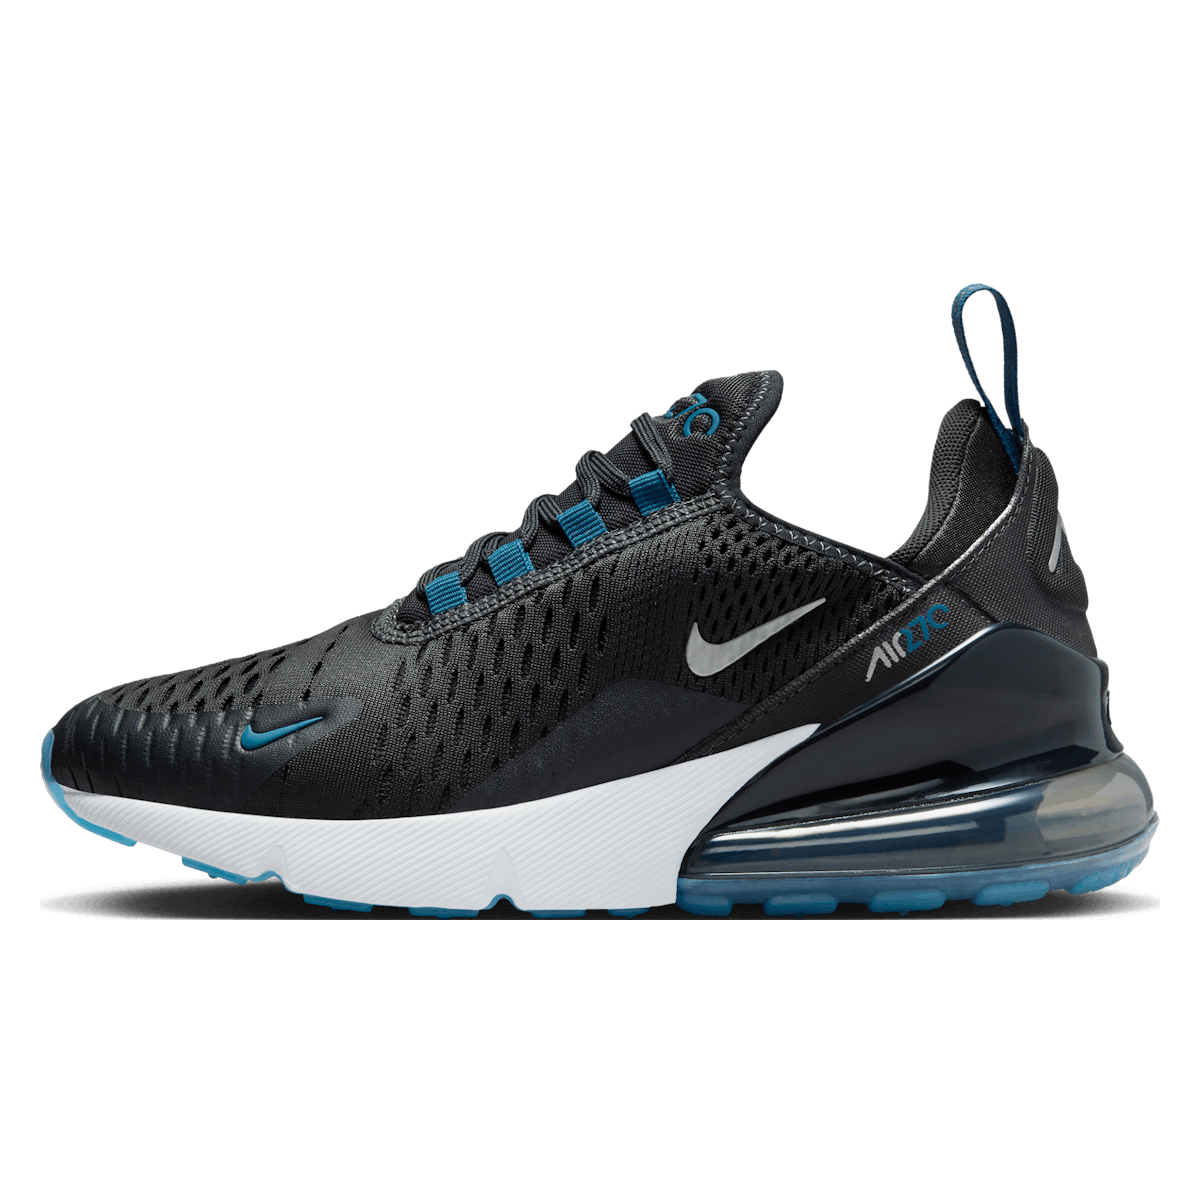 Nike Air Max 270 GS "Anthracite Industrial Blue"